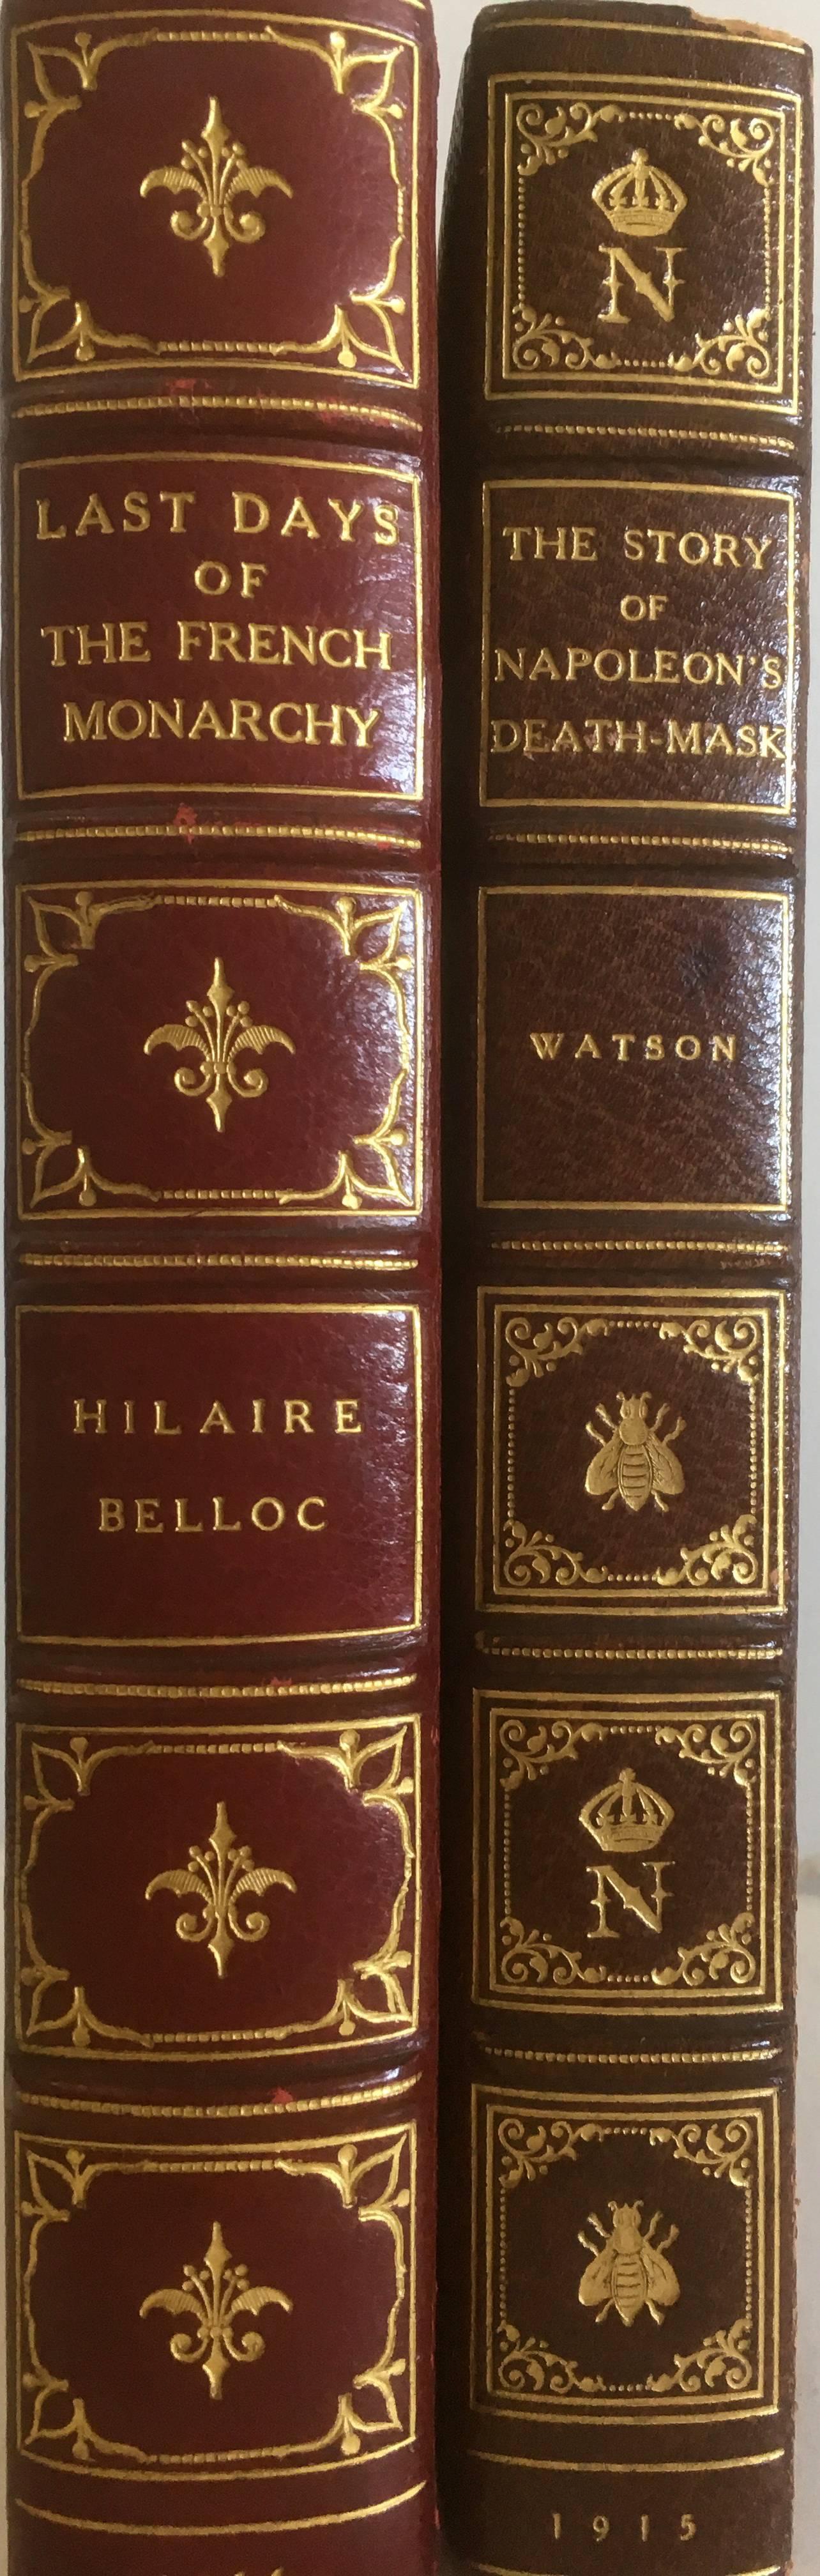 Napoleon Bonaparte: Assorted Book Collection From 1811 - 1924. 
Estimate that 30 of the books are 1st editions.
A complete list of each individual book within this Collection as follows.

Title	  Author Year	Publisher

The Life of Napoleon Bonaparte